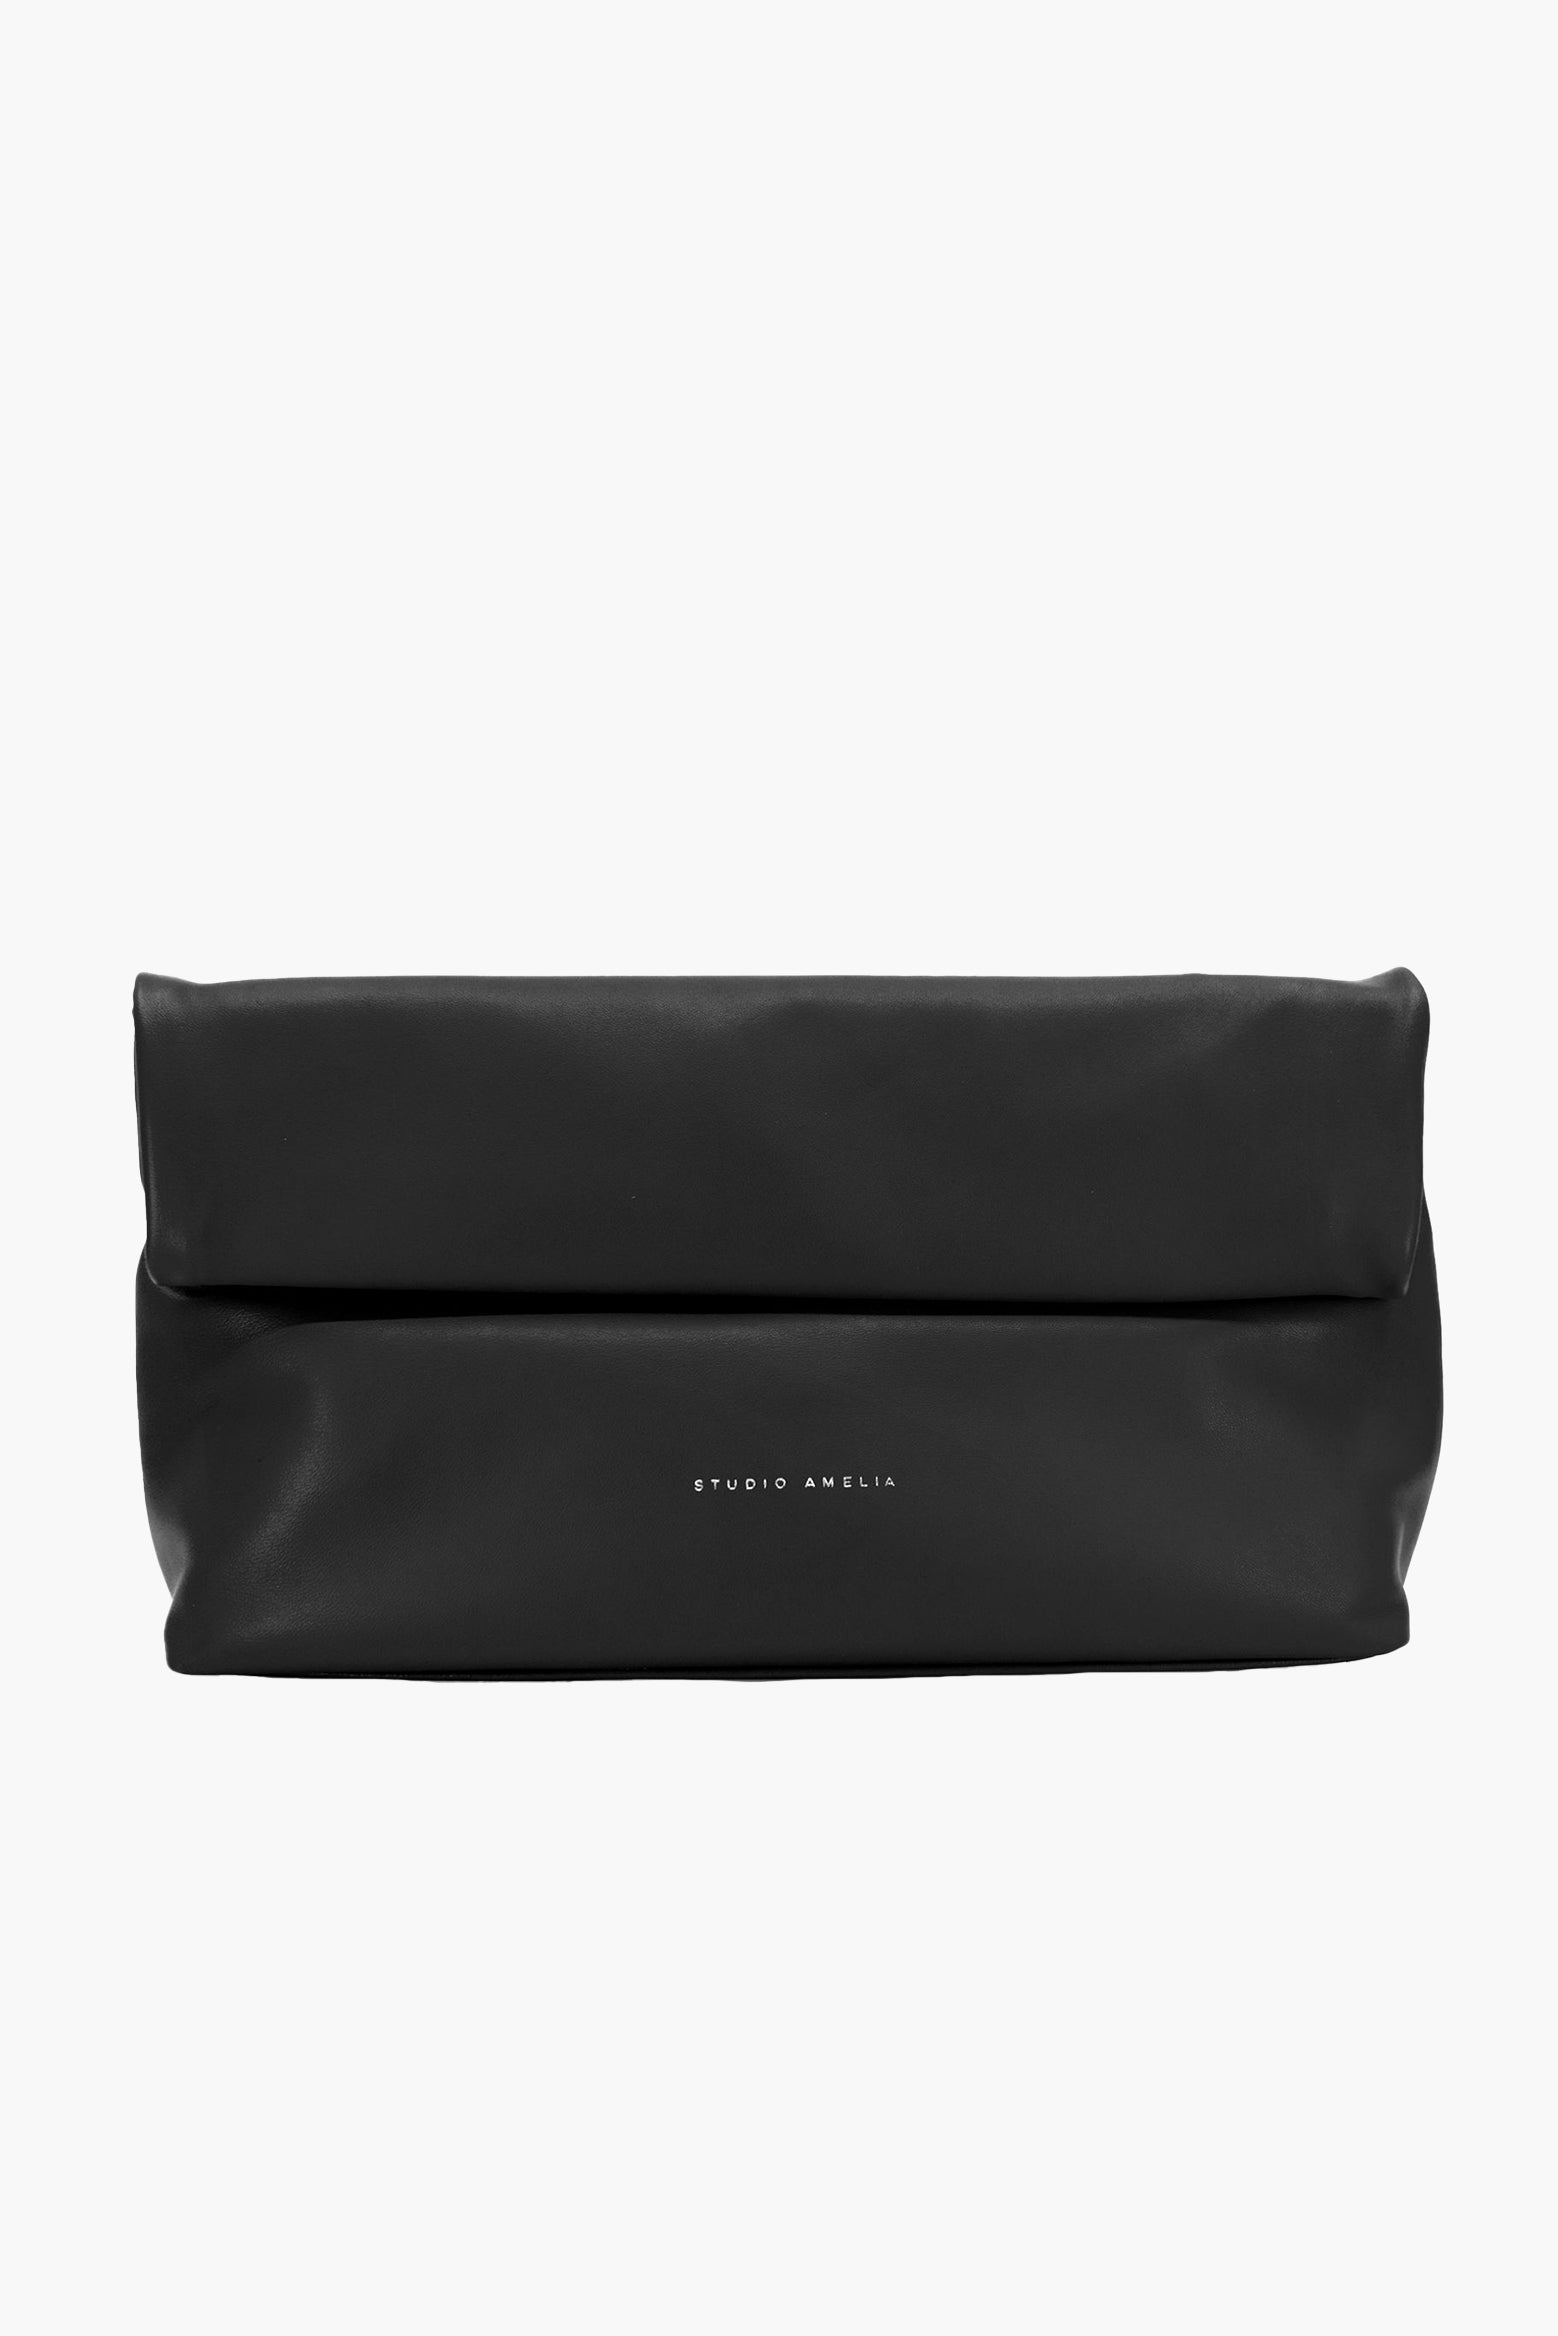 The Studio Amelia Pillow Clutch in Black available at The New Trend Australia